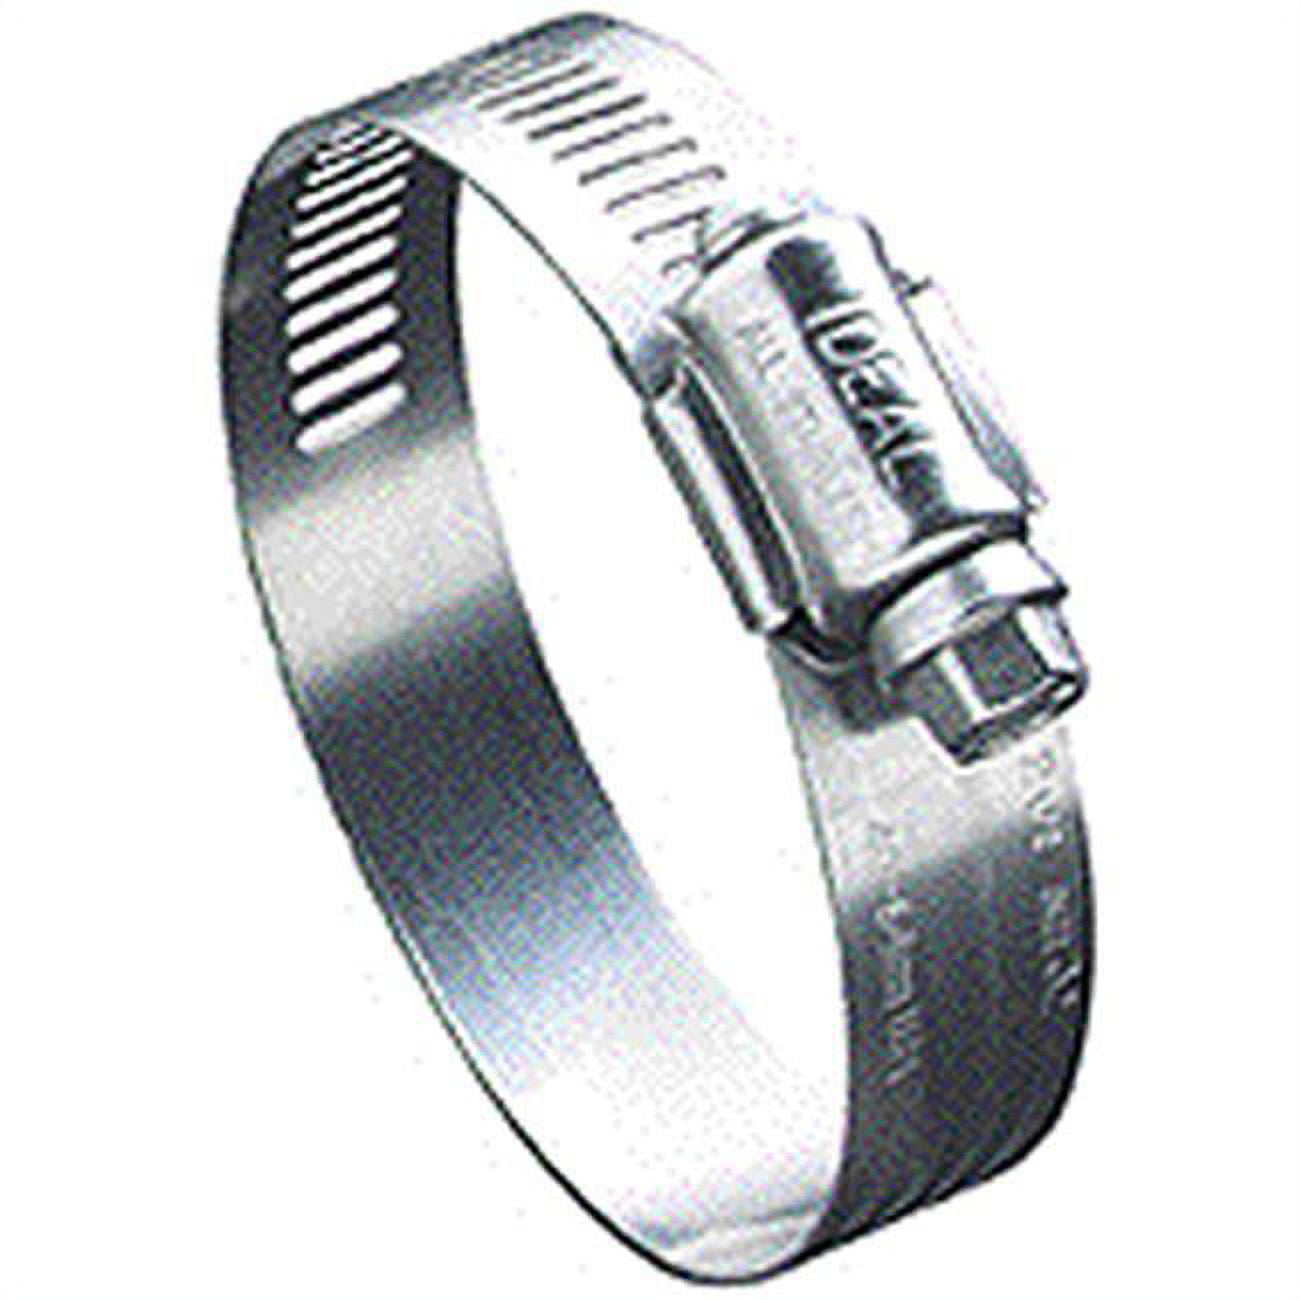 6832053 1.63 X 2.5 In. Stainless Steel Hose Clamp - Pack Of 10